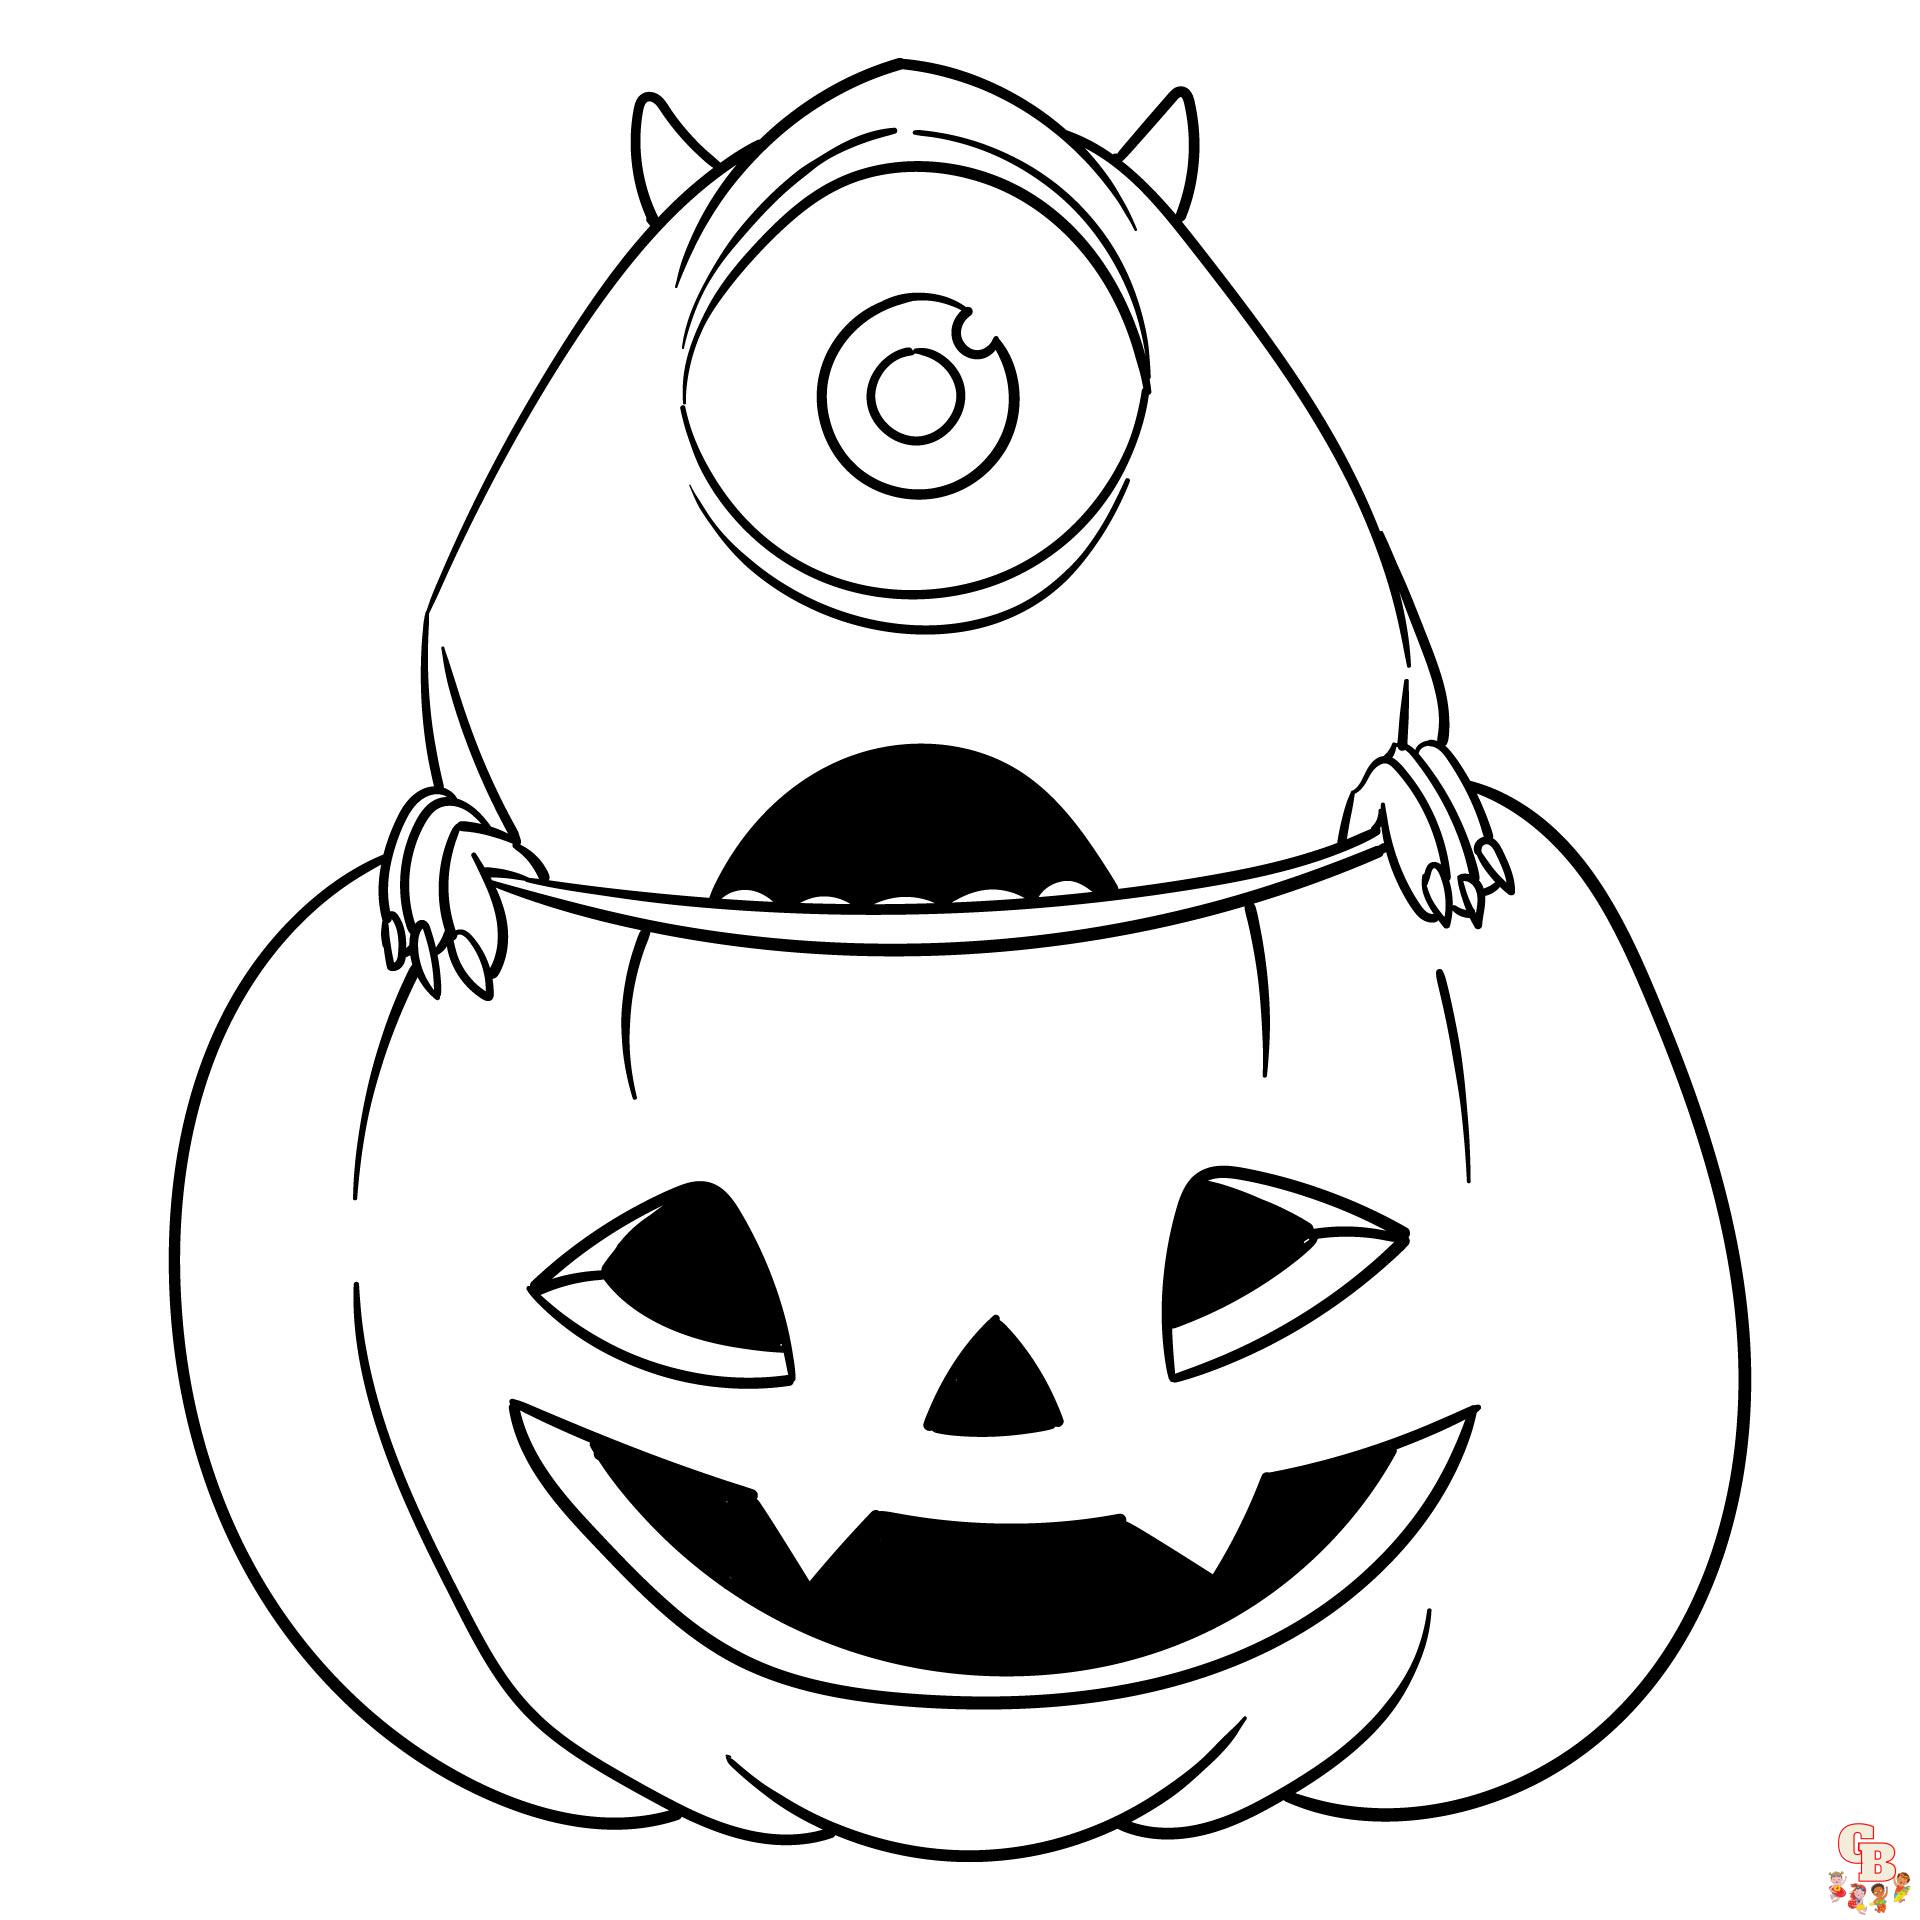 Easy cute halloween coloring pages